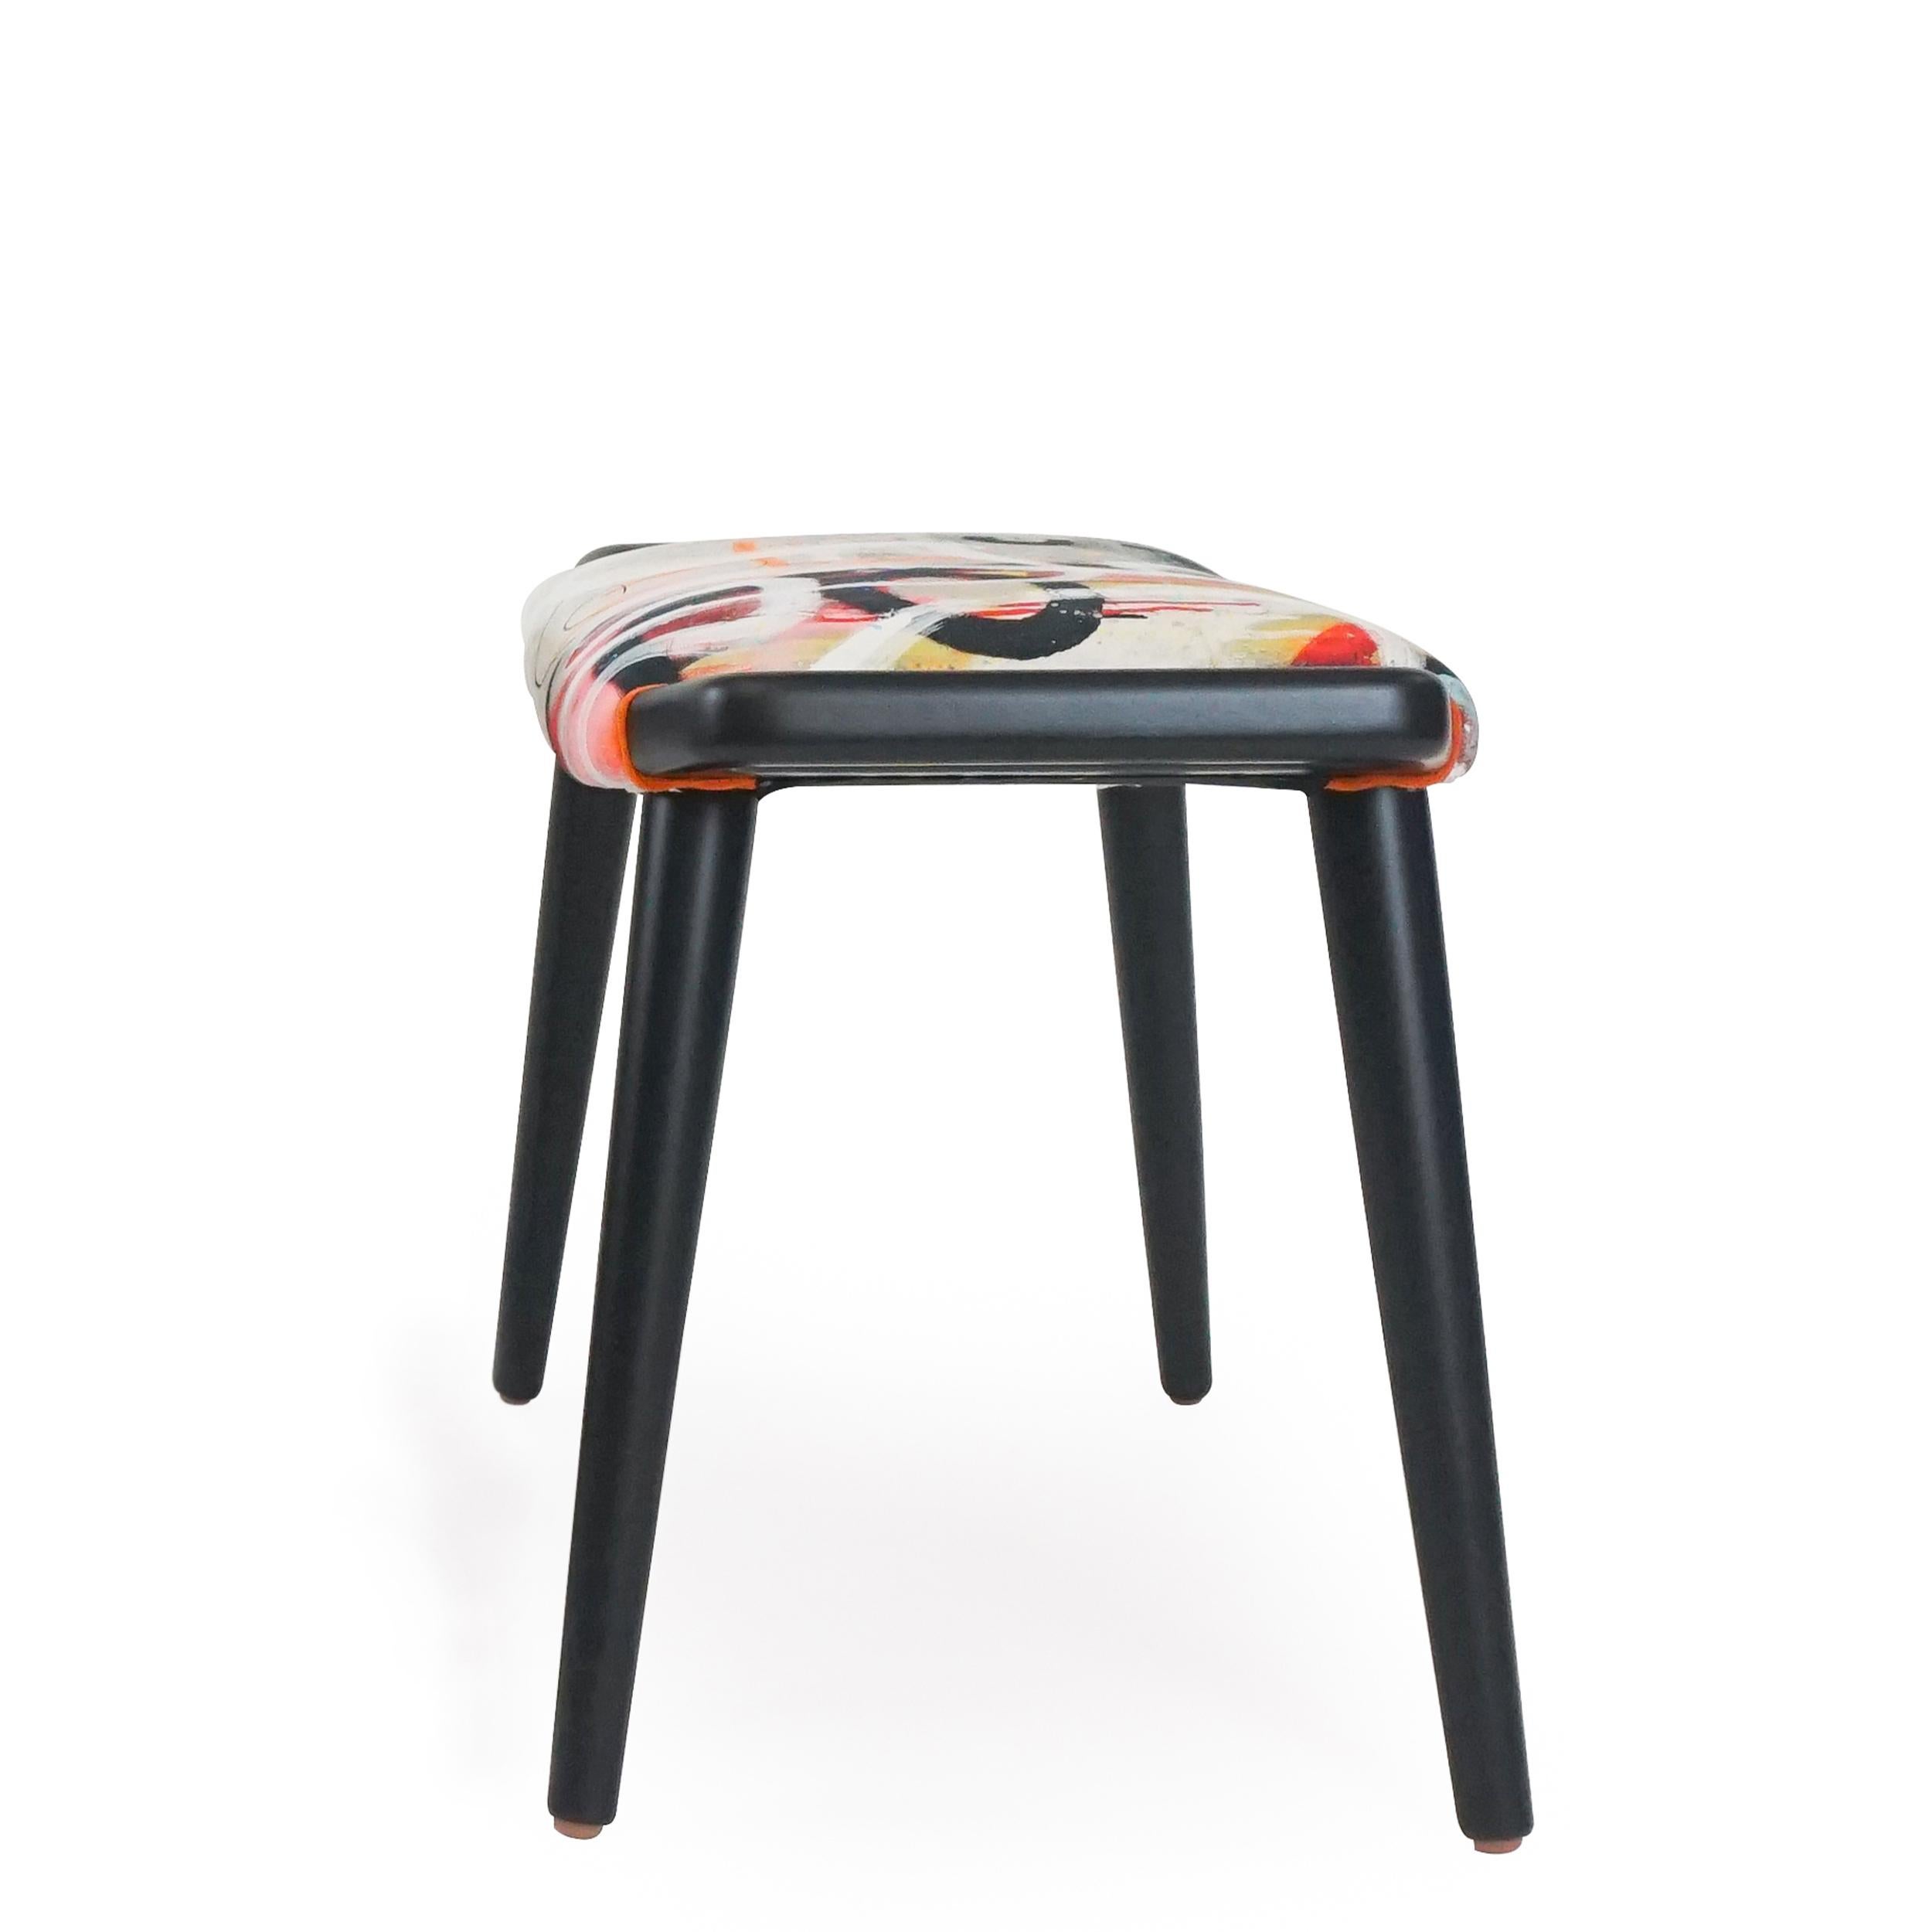 About this piece
Solid hardwood ottoman lacquered in black with matte finish. Upholstered in cotton graffiti print. Can be used as occasional seating, ottoman or cocktail table with tray.

Price is per one ottoman in fabric shown. This customizable